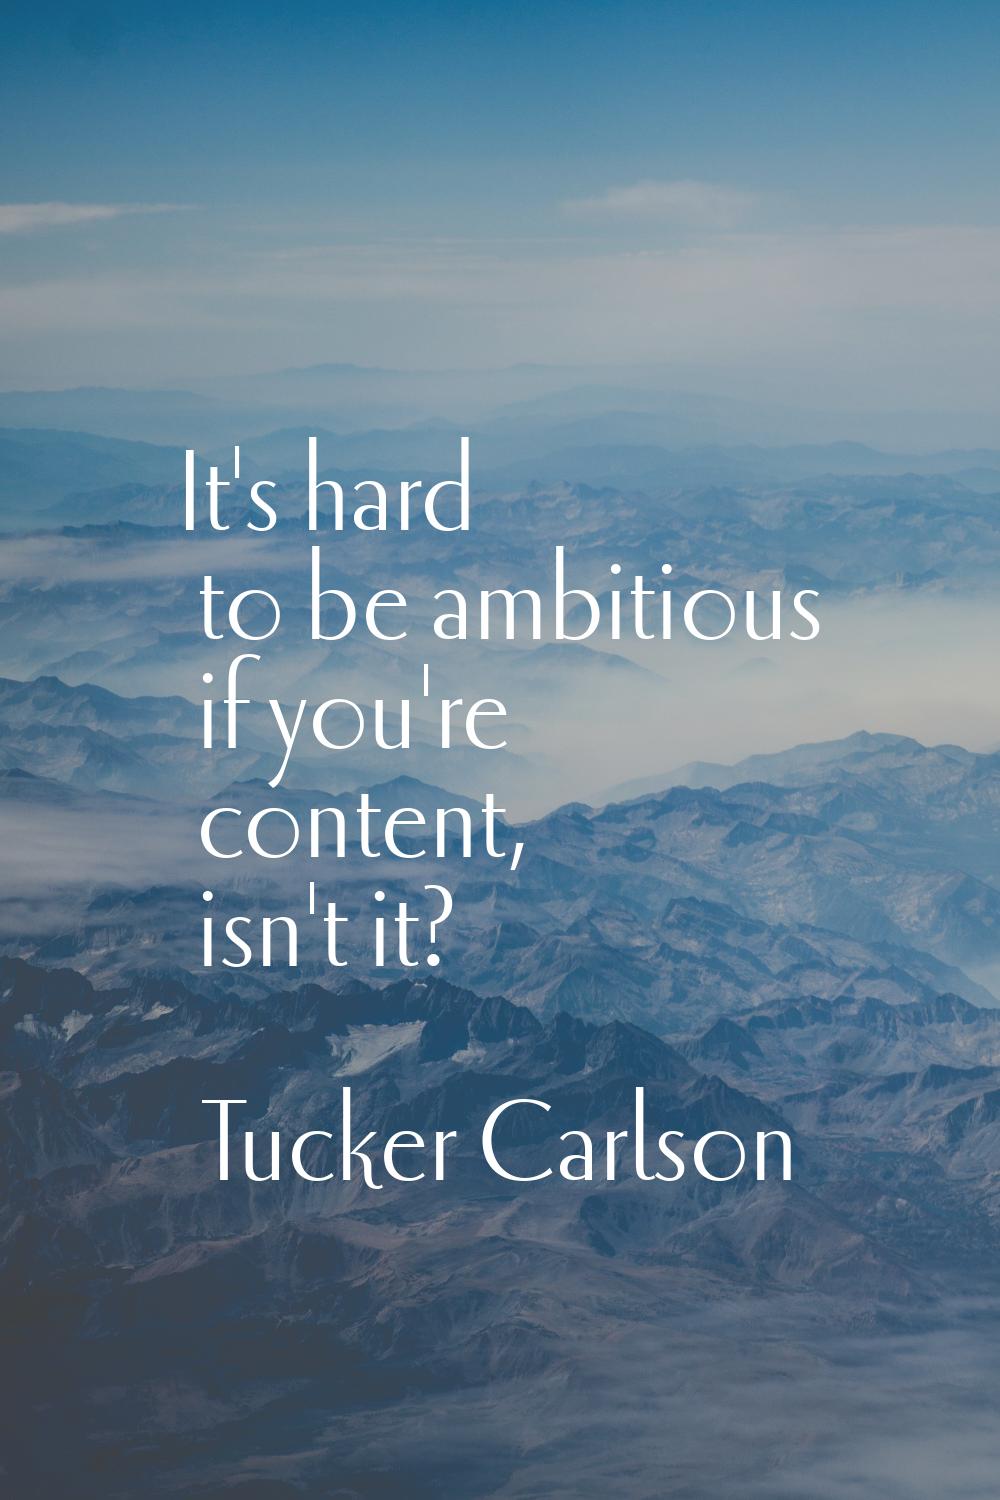 It's hard to be ambitious if you're content, isn't it?